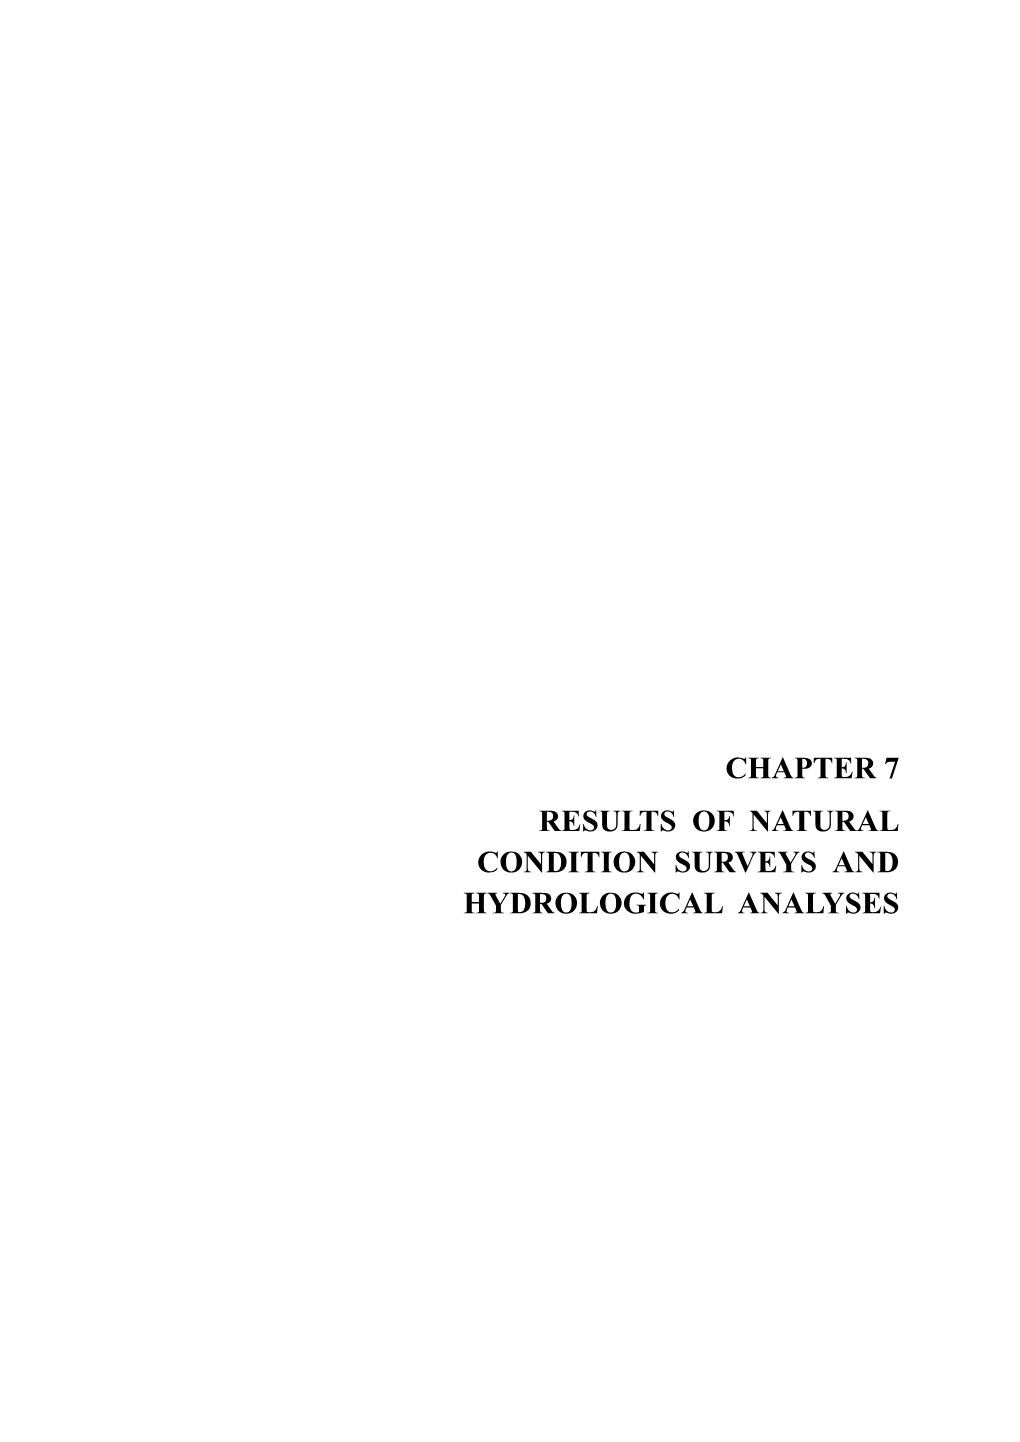 Chapter 7 Results of Natural Condition Surveys and Hydrological Analyses